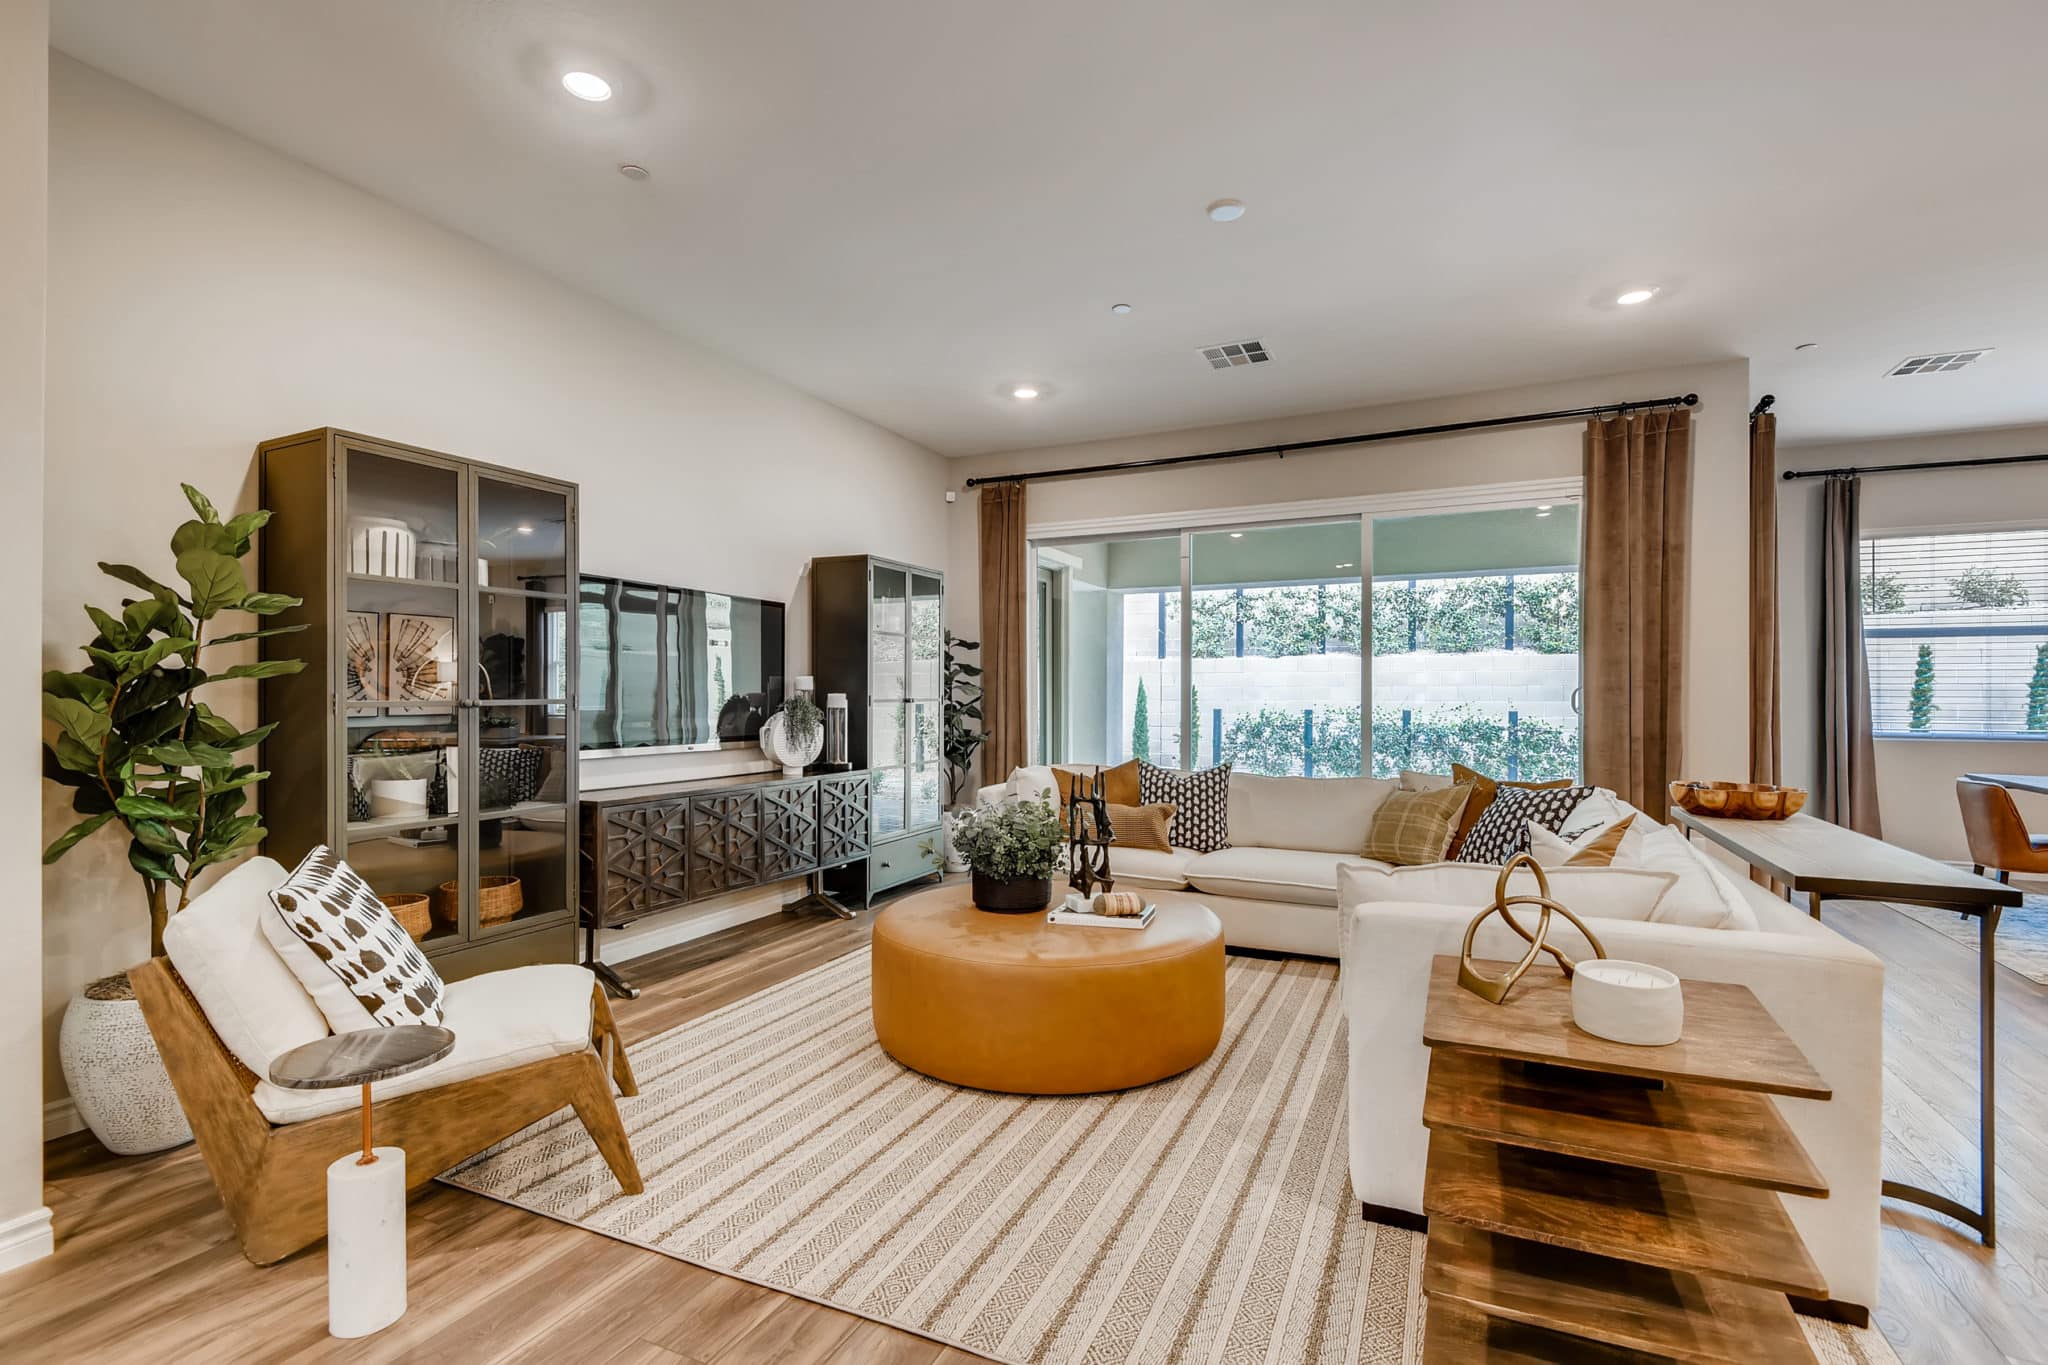 Living Room of Everly model at Heritage by Lennar